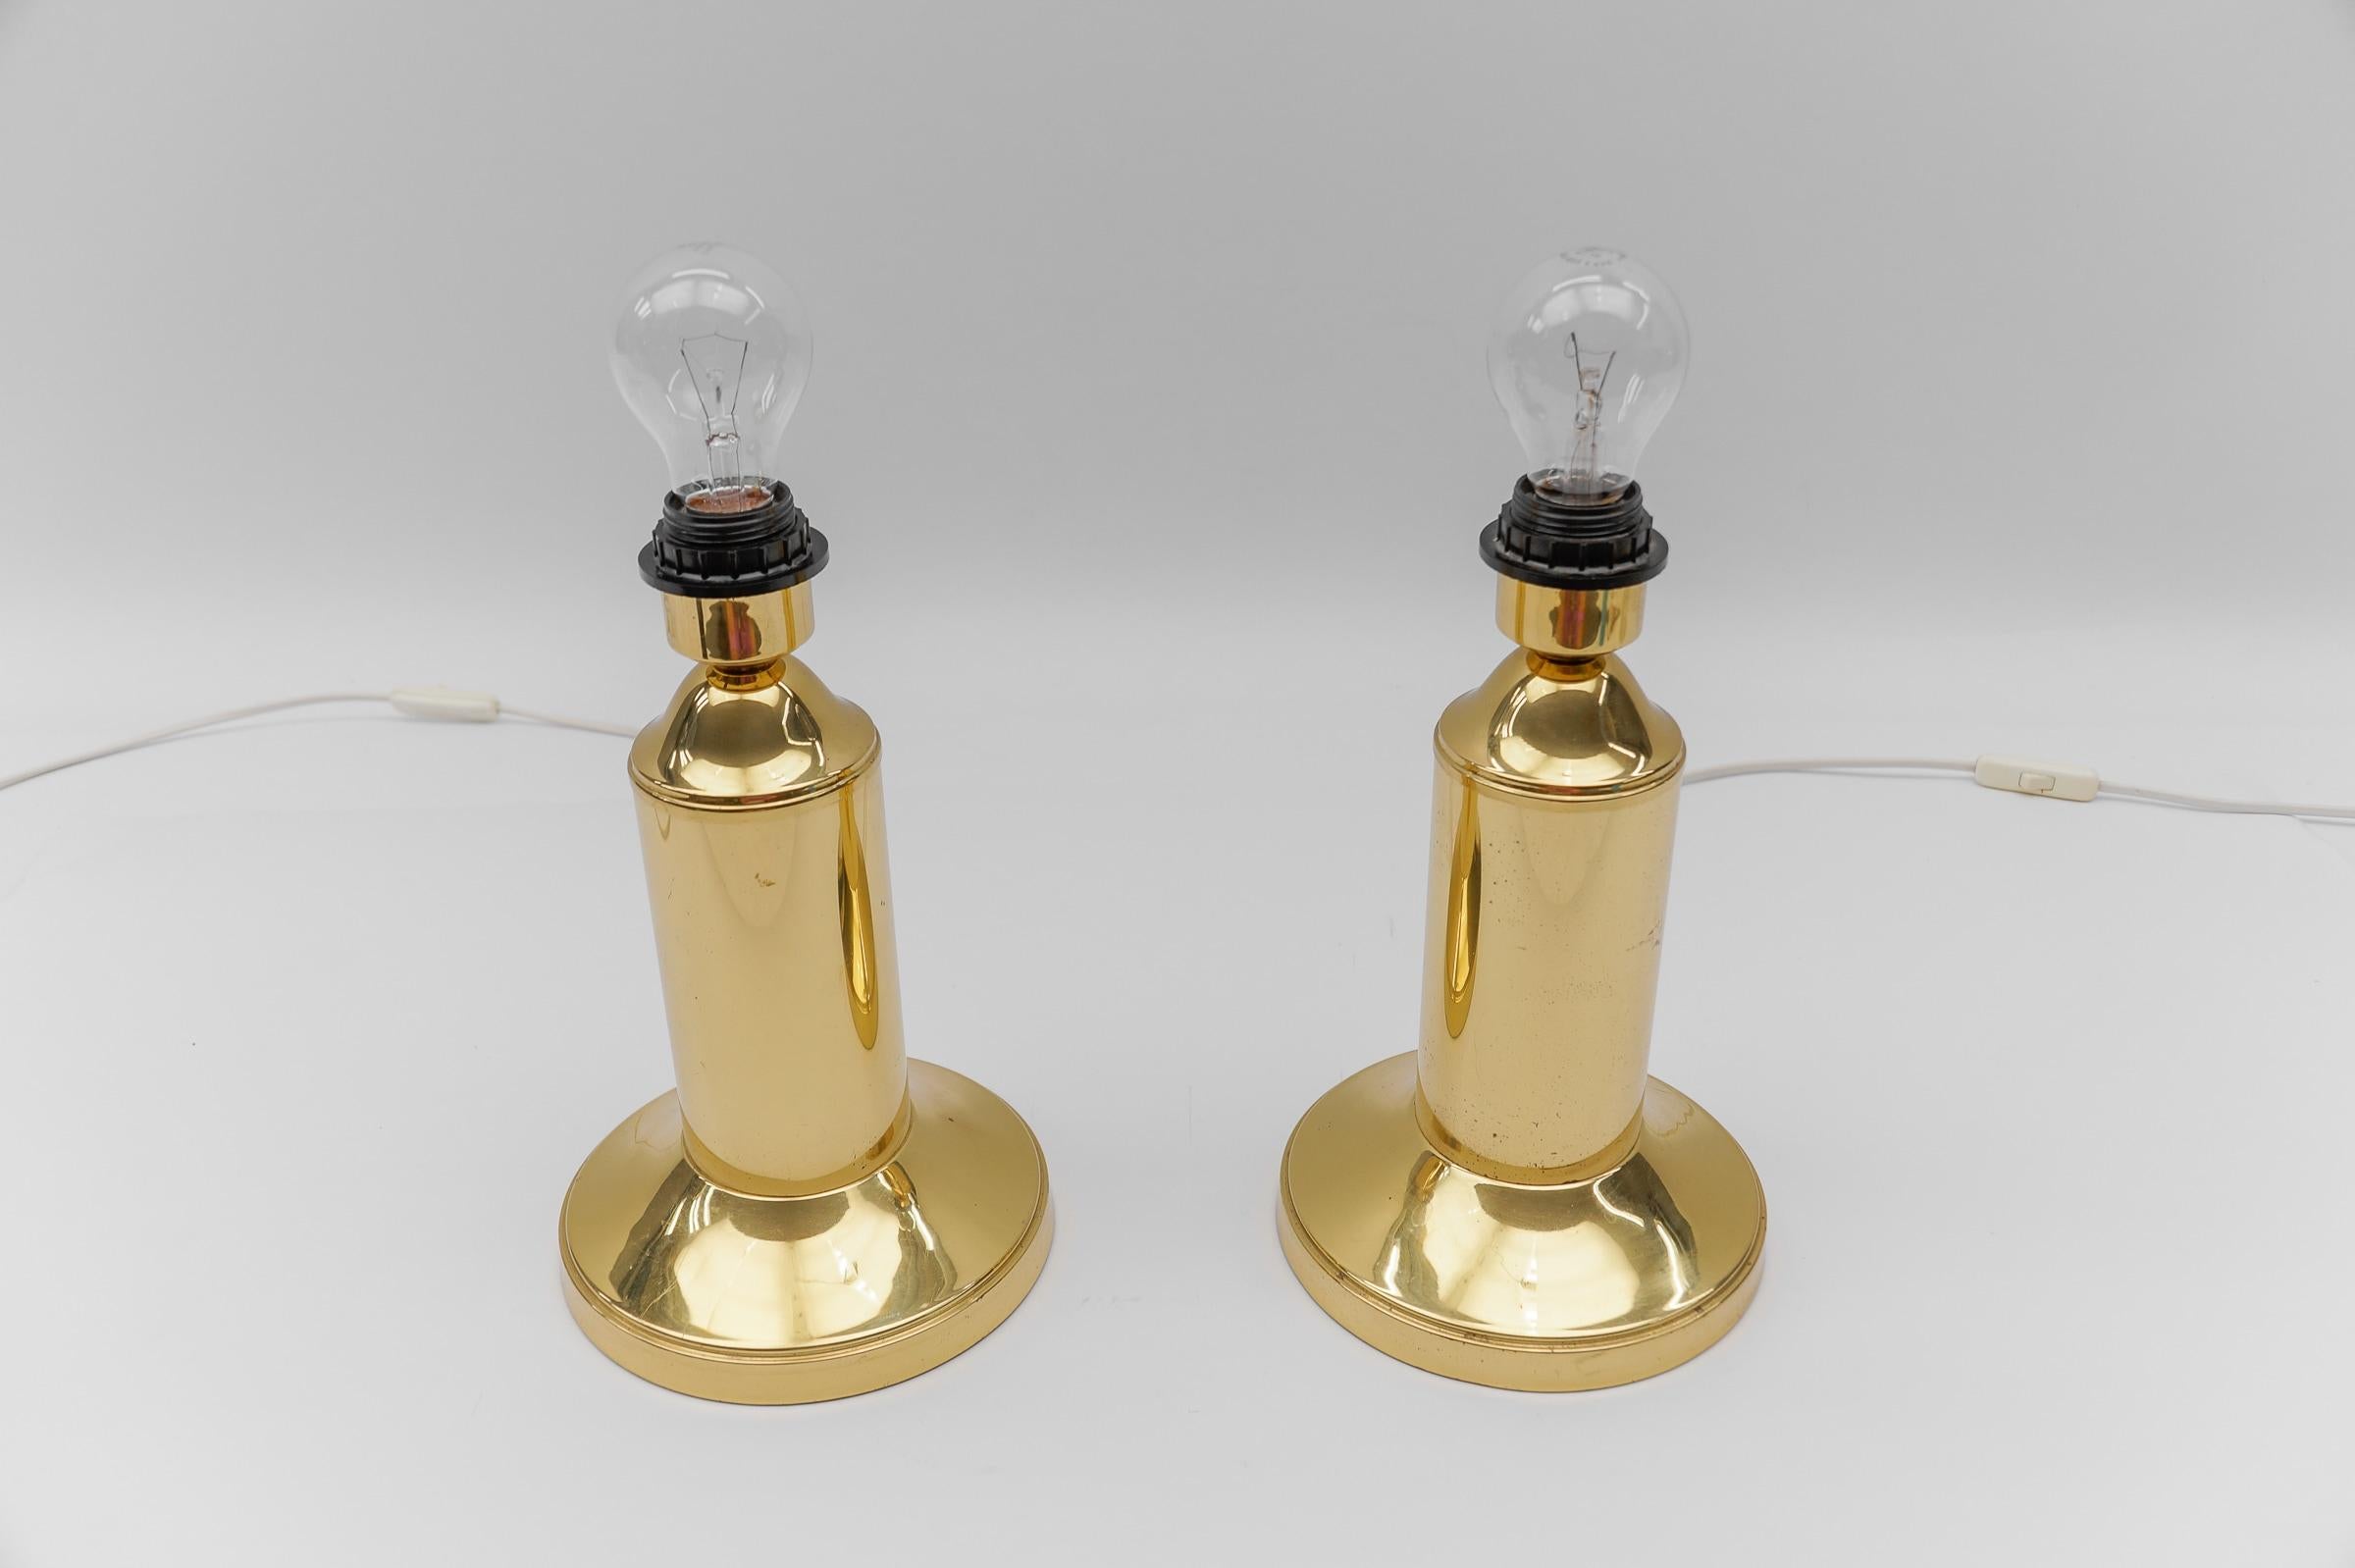 Metal Pair of Mid Century Modern Brass Table Lamp Bases, 1960s For Sale